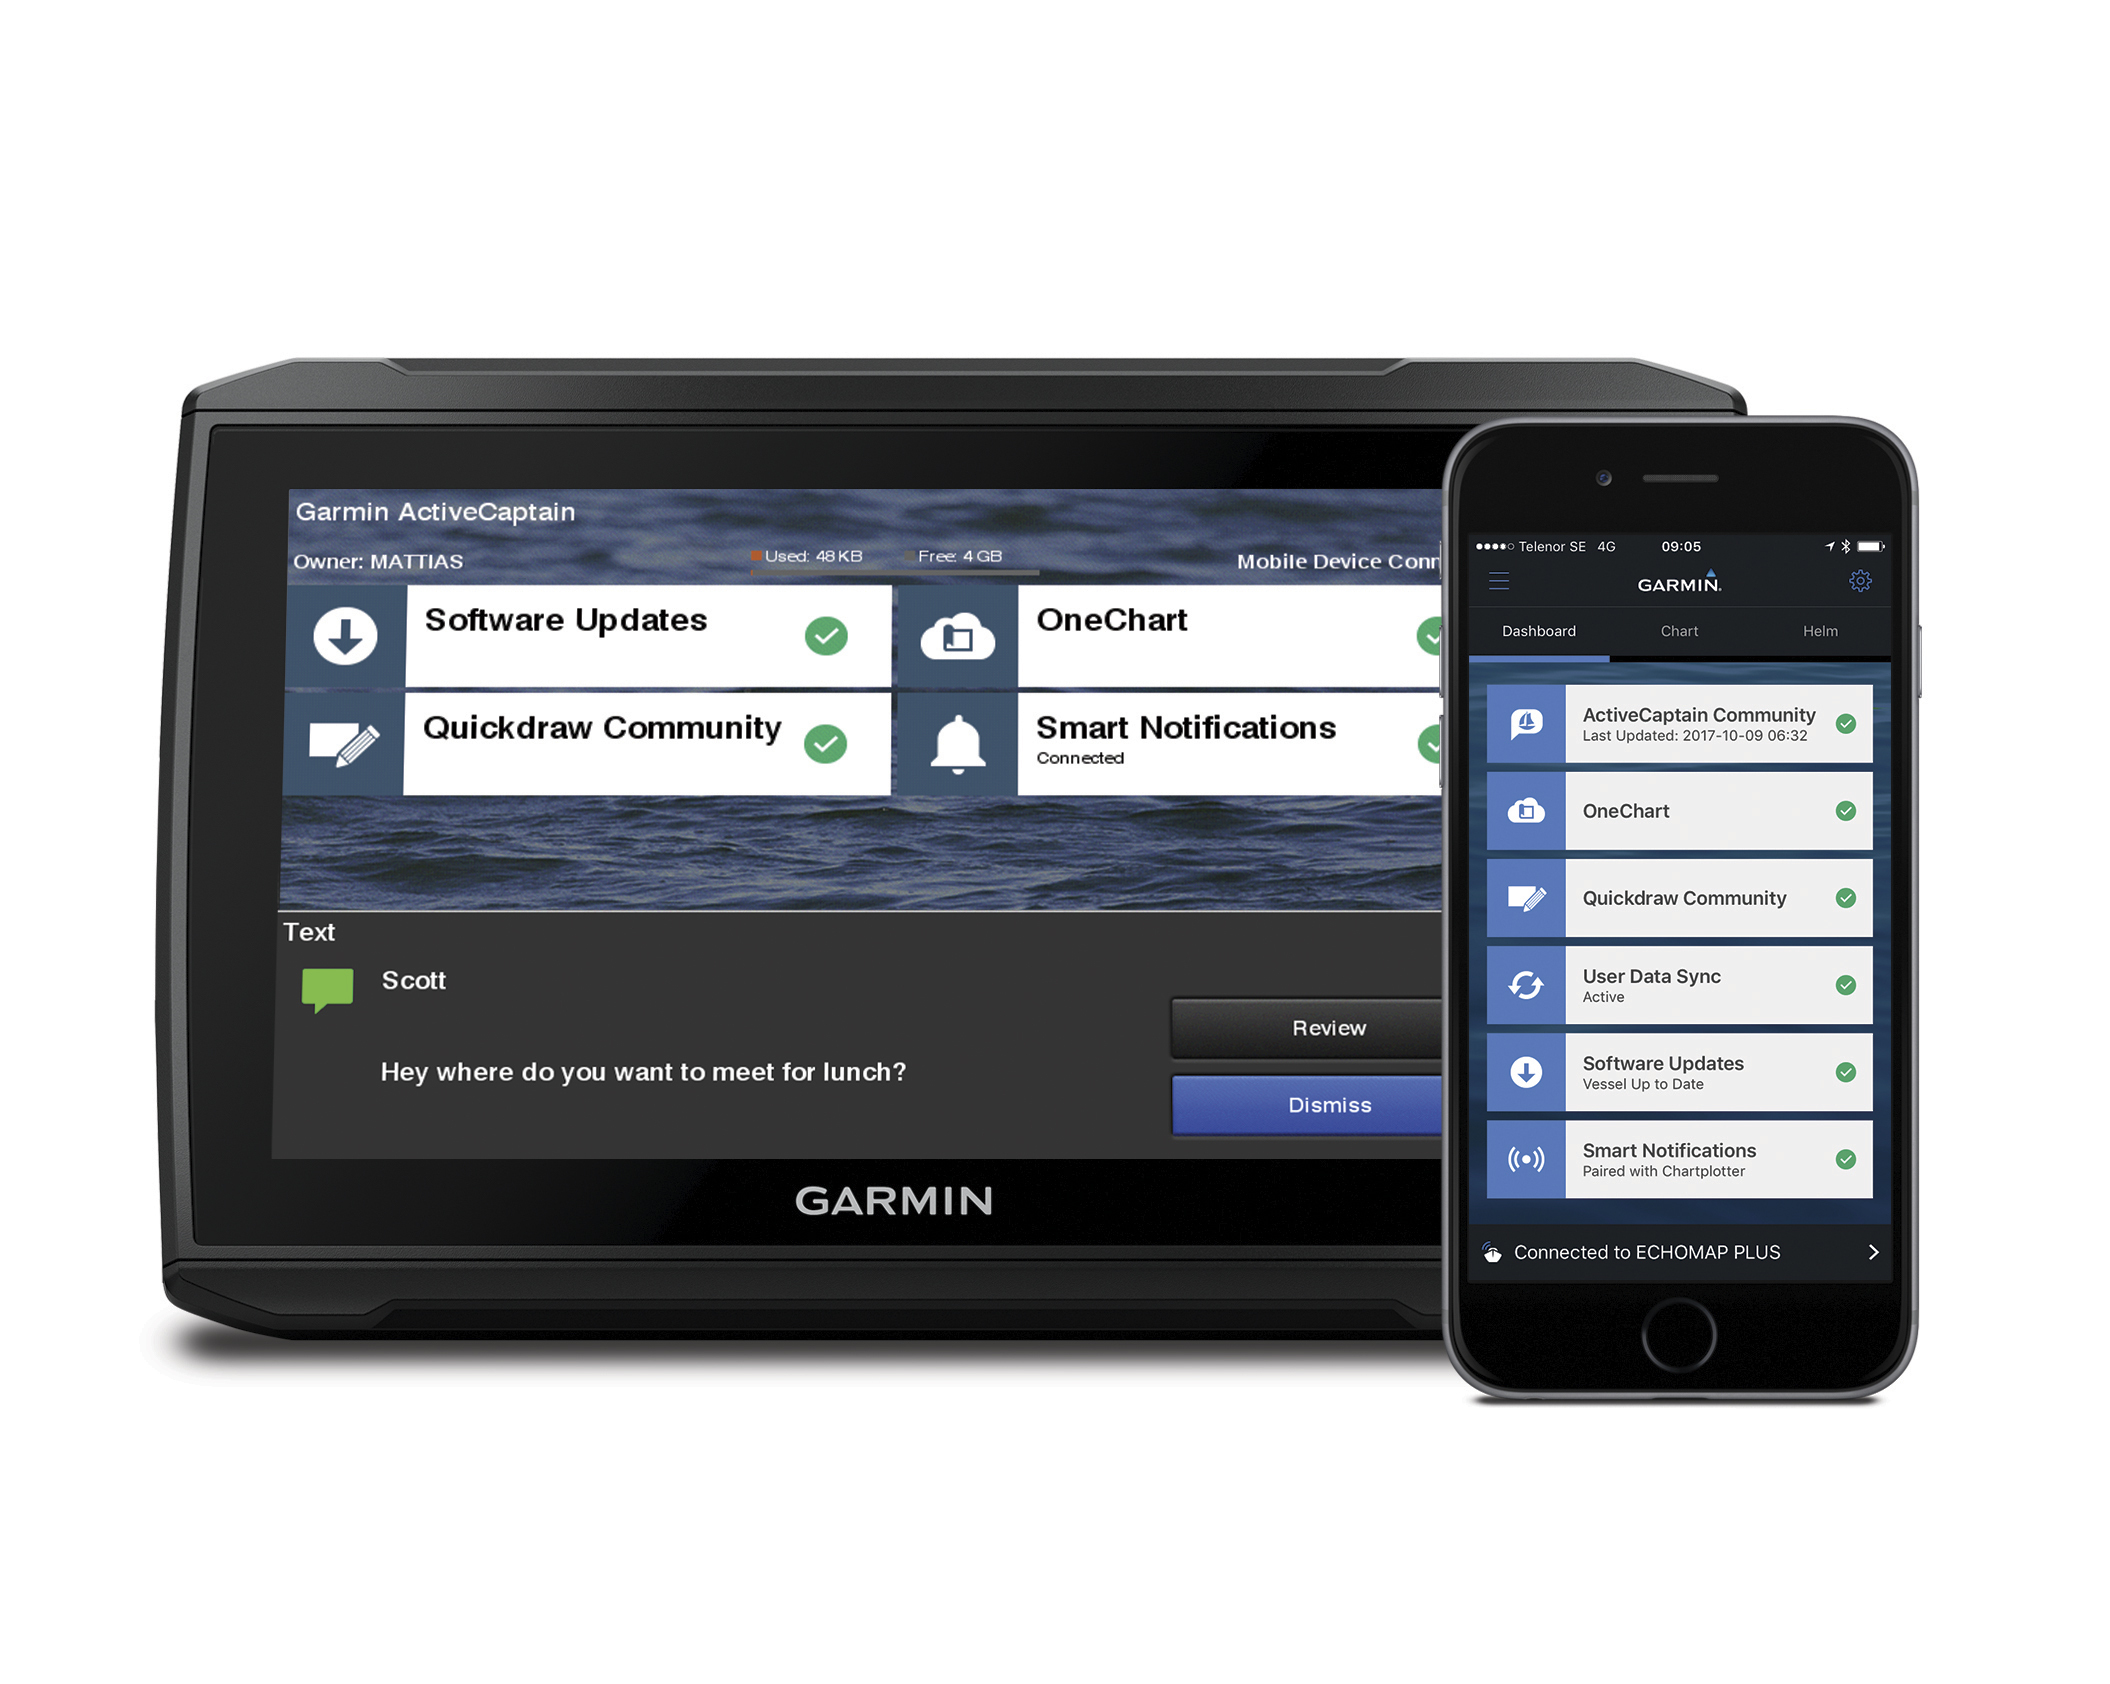 Garmin® the ultimate connected experience with the introduction of ActiveCaptain mobile app | Business Wire